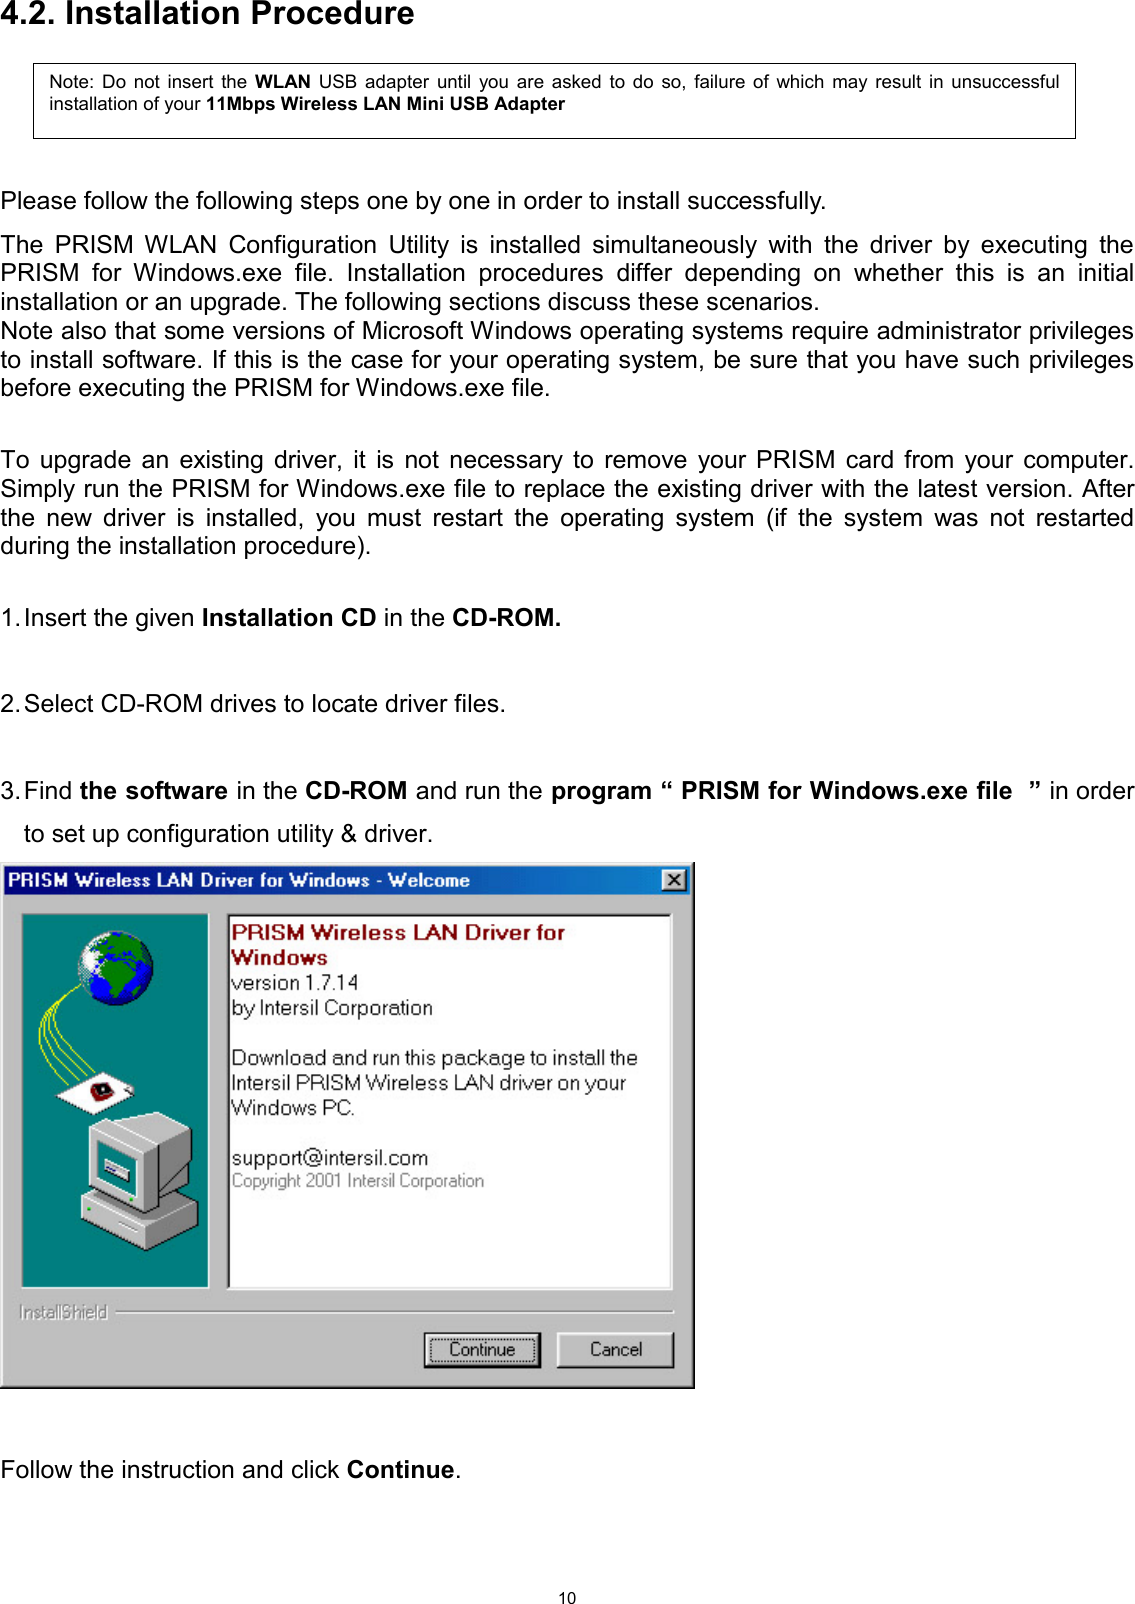  104.2. Installation Procedure     Please follow the following steps one by one in order to install successfully. The PRISM WLAN Configuration Utility is installed simultaneously with the driver by executing the PRISM for Windows.exe file. Installation procedures differ depending on whether this is an initial installation or an upgrade. The following sections discuss these scenarios. Note also that some versions of Microsoft Windows operating systems require administrator privileges to install software. If this is the case for your operating system, be sure that you have such privileges before executing the PRISM for Windows.exe file.  To upgrade an existing driver, it is not necessary to remove your PRISM card from your computer. Simply run the PRISM for Windows.exe file to replace the existing driver with the latest version. After the new driver is installed, you must restart the operating system (if the system was not restarted during the installation procedure).  1. Insert the given Installation CD in the CD-ROM.  2. Select CD-ROM drives to locate driver files.   3. Find  the software in the CD-ROM and run the program “ PRISM for Windows.exe file  ” in order to set up configuration utility &amp; driver.     Follow the instruction and click Continue.   Note: Do not insert the WLAN USB adapter until you are asked to do so, failure of which may result in unsuccessfulinstallation of your 11Mbps Wireless LAN Mini USB Adapter  